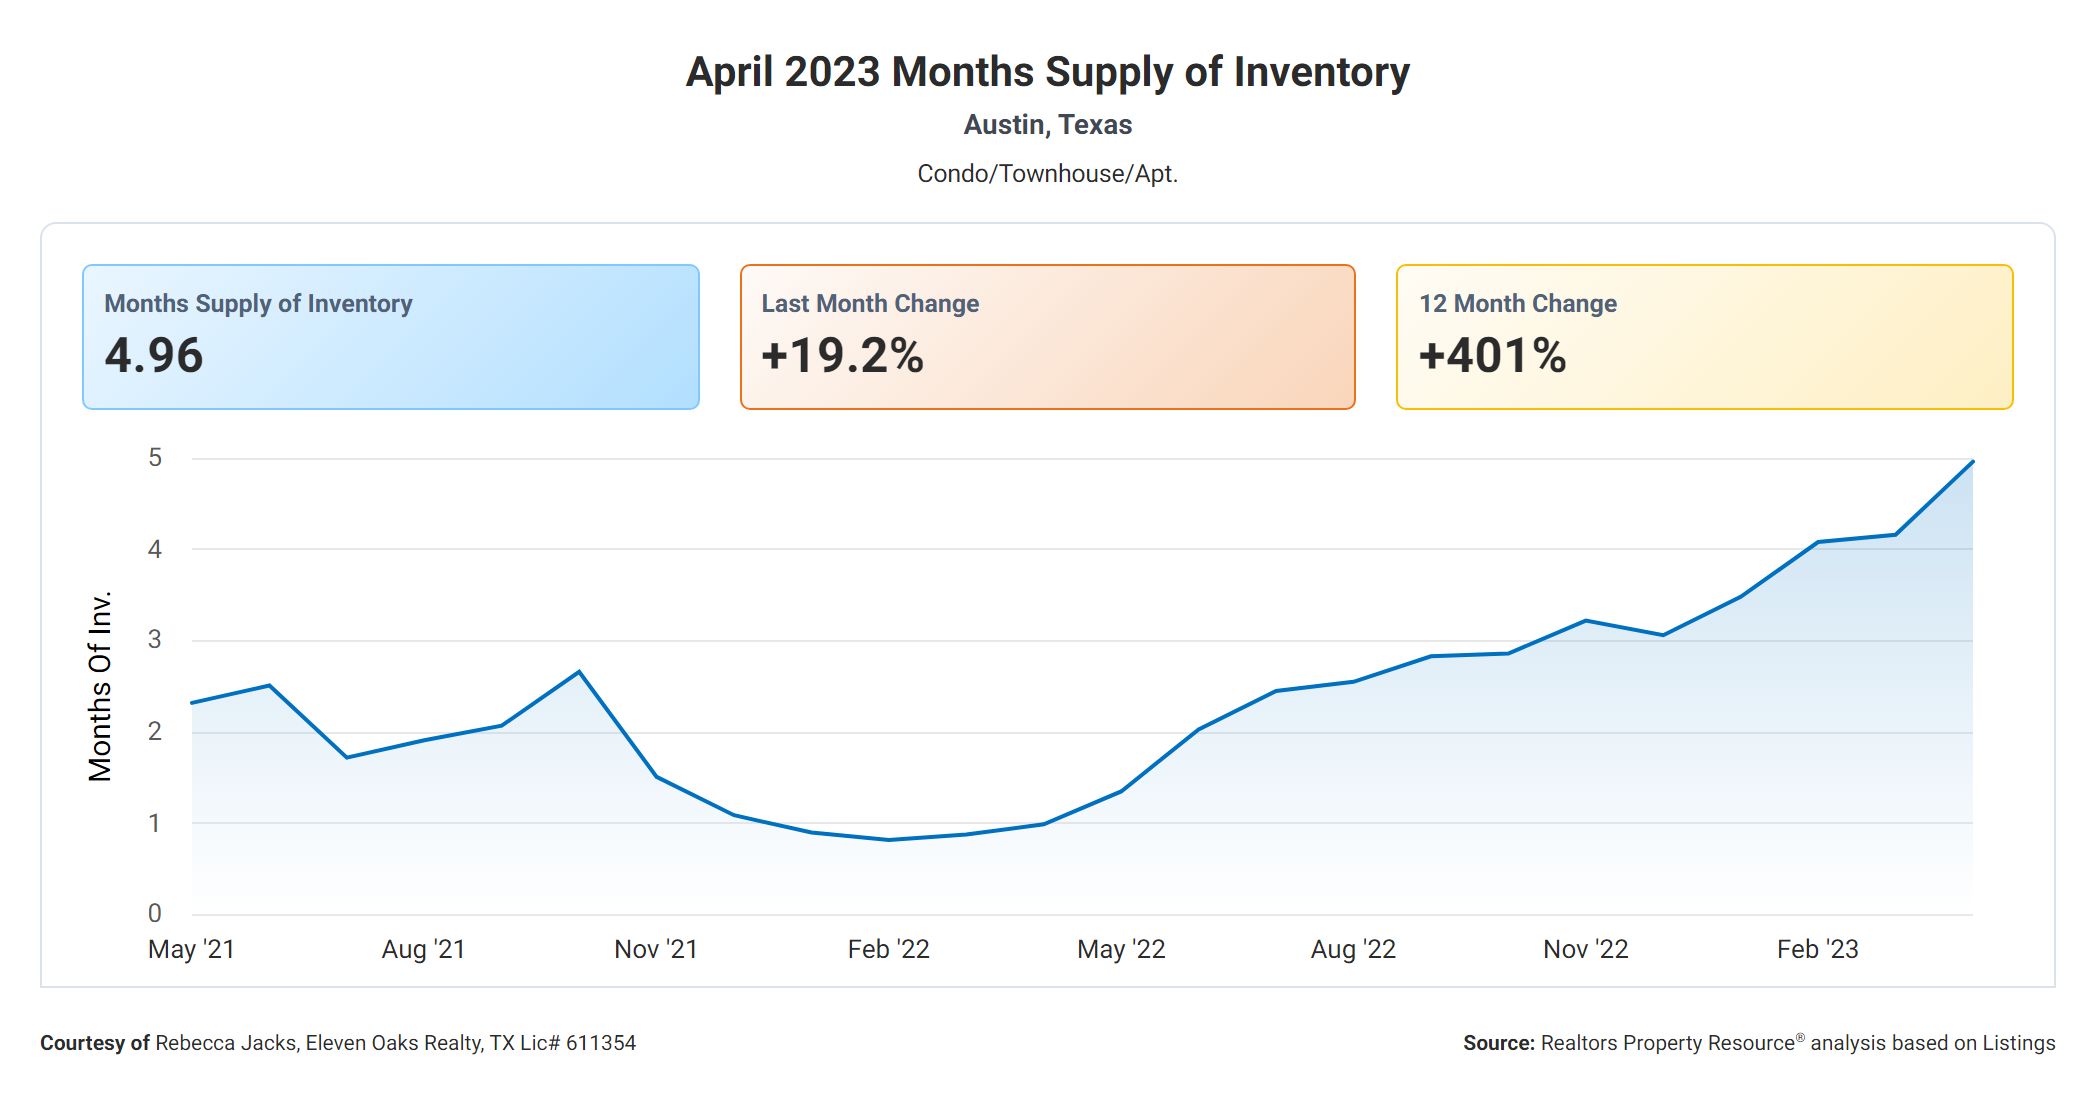 April 2023 Austin months supply of inventory condos